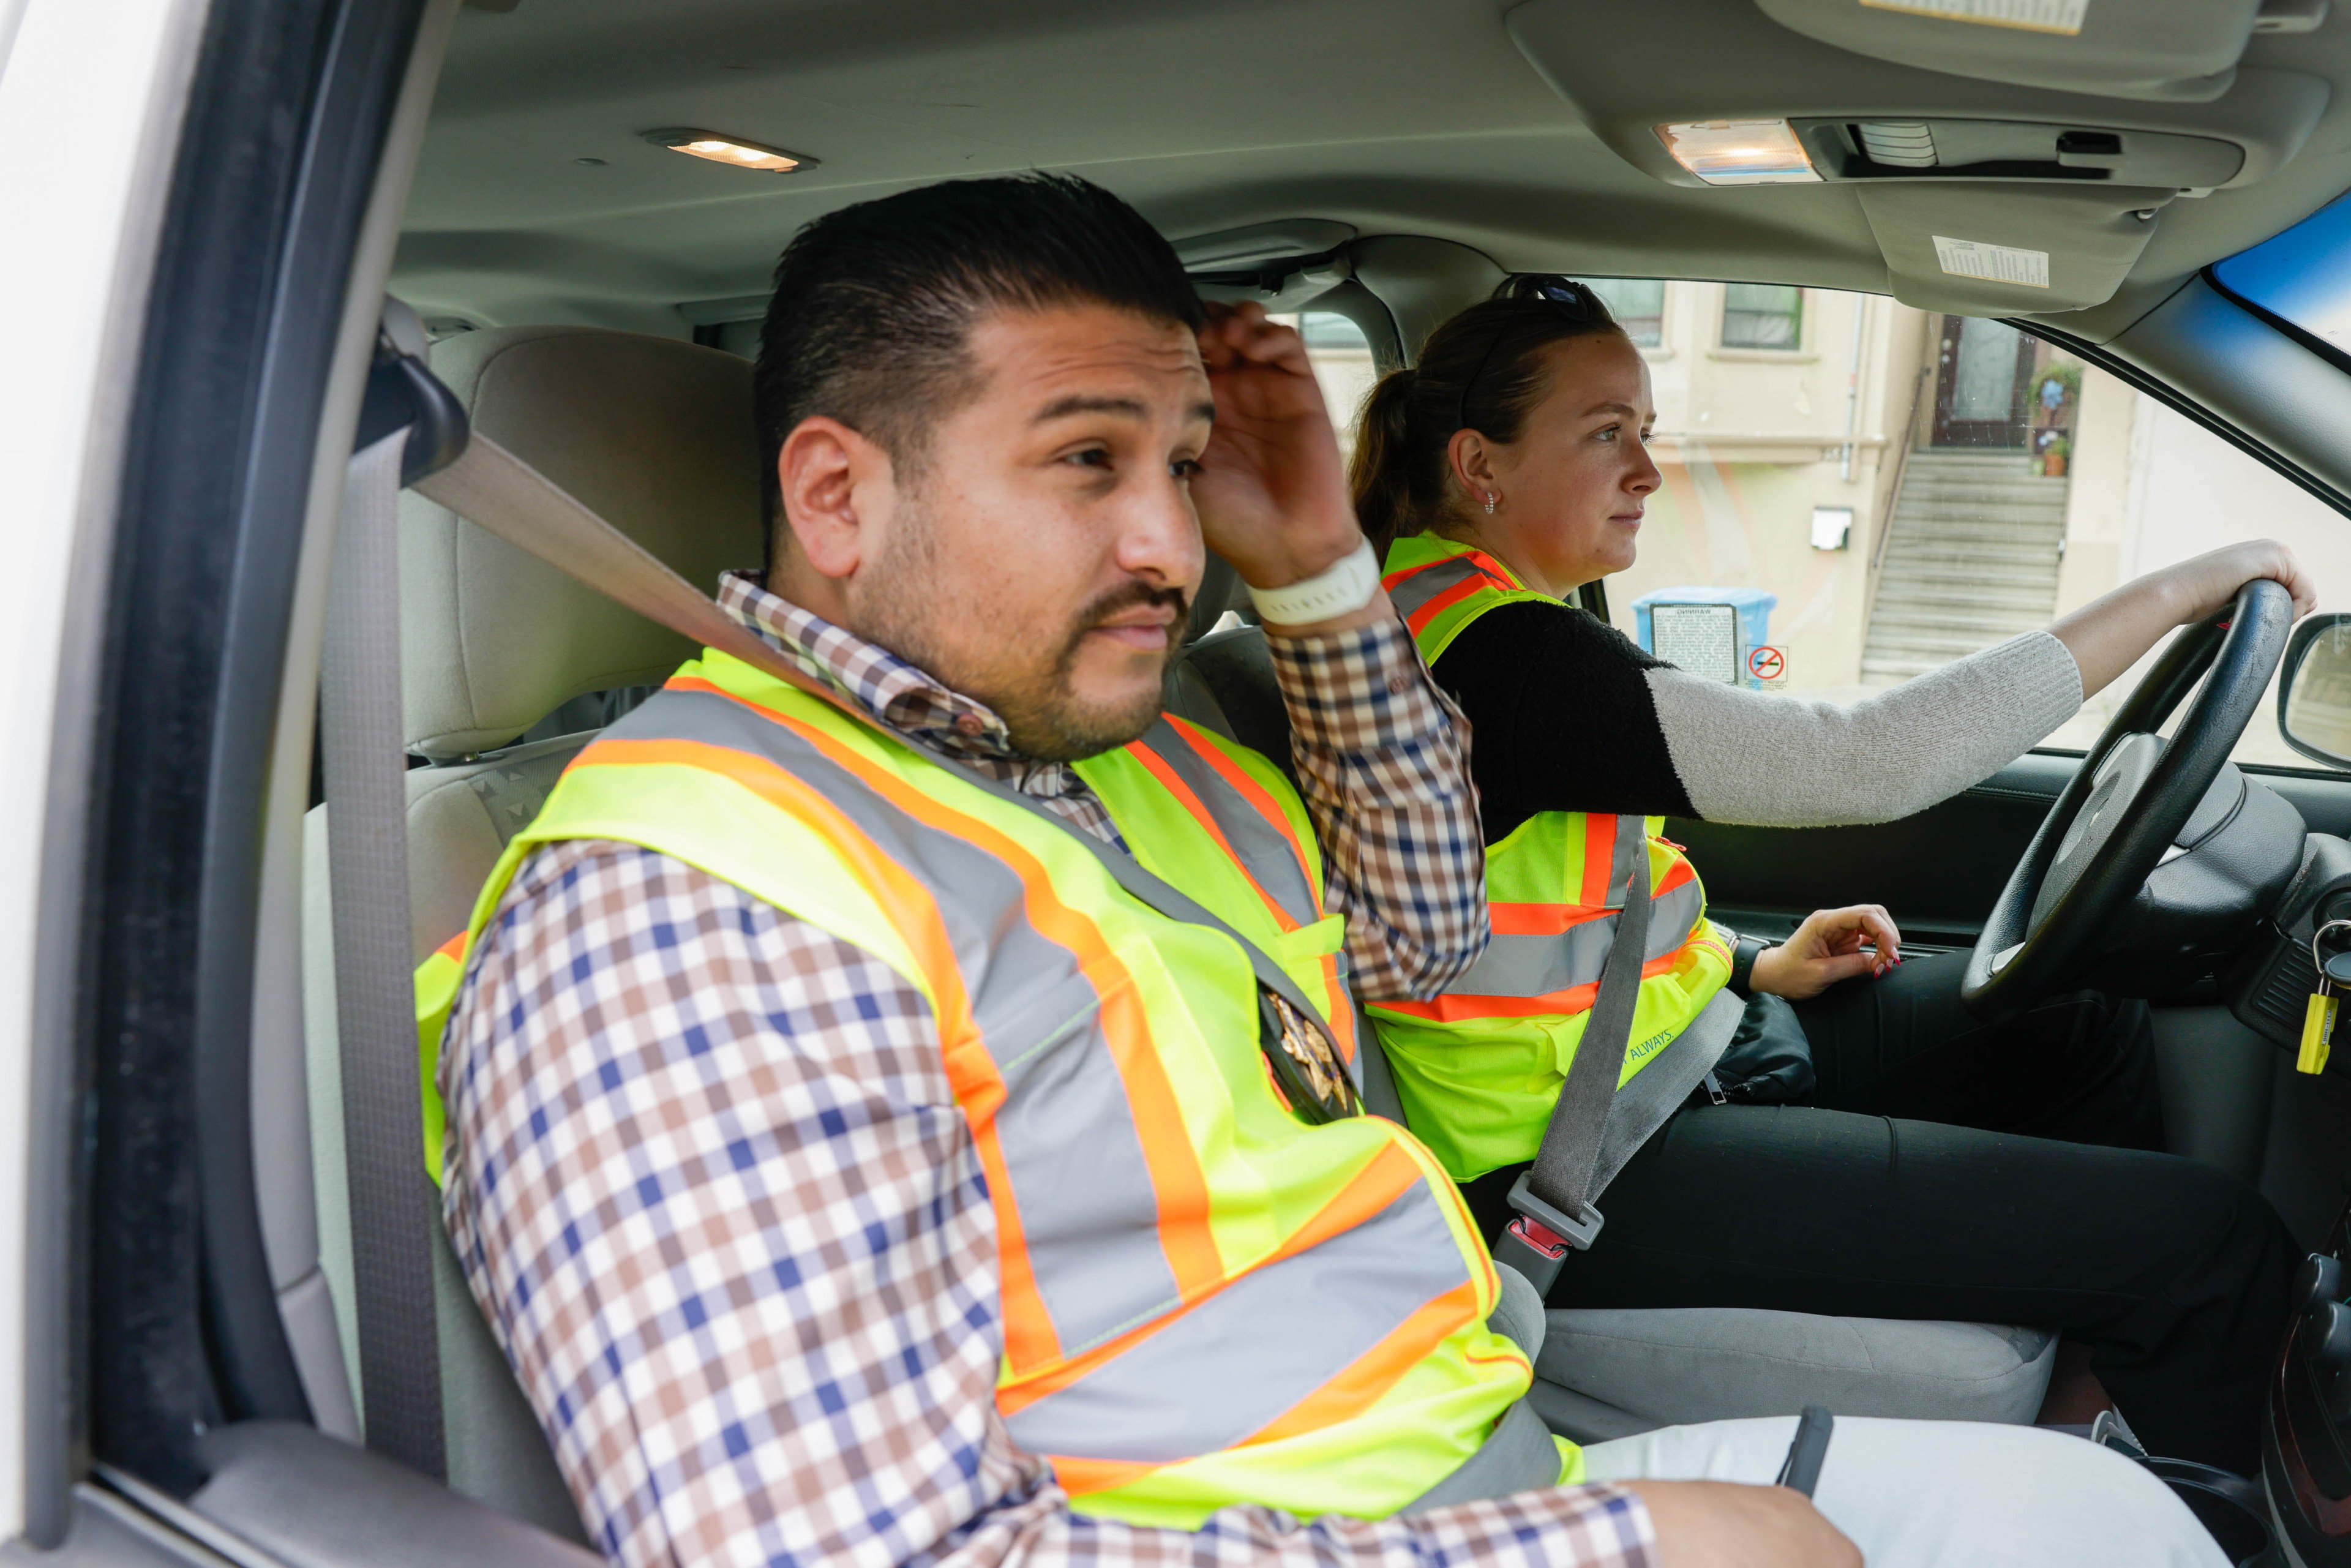 Two people in high-visibility vests are seated in a vehicle; a man in the passenger seat and a woman driving. 